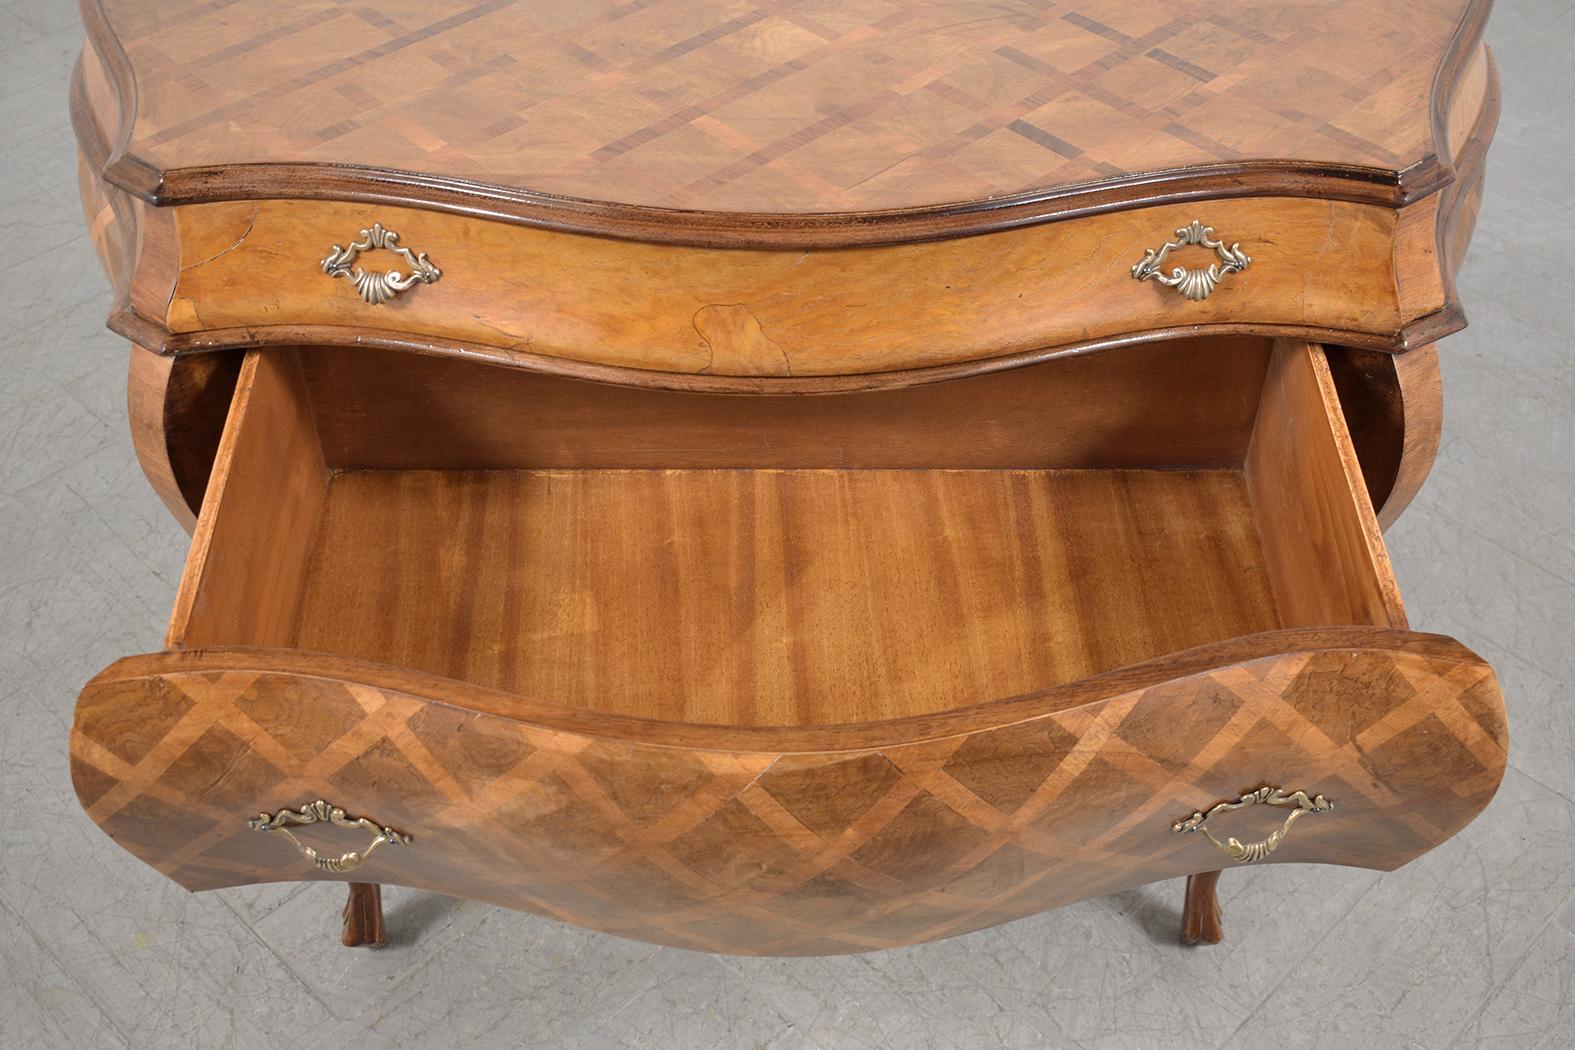 Italian Vintage Commode: Restored Wood and Marquetry Veneer Bombay Chest 4